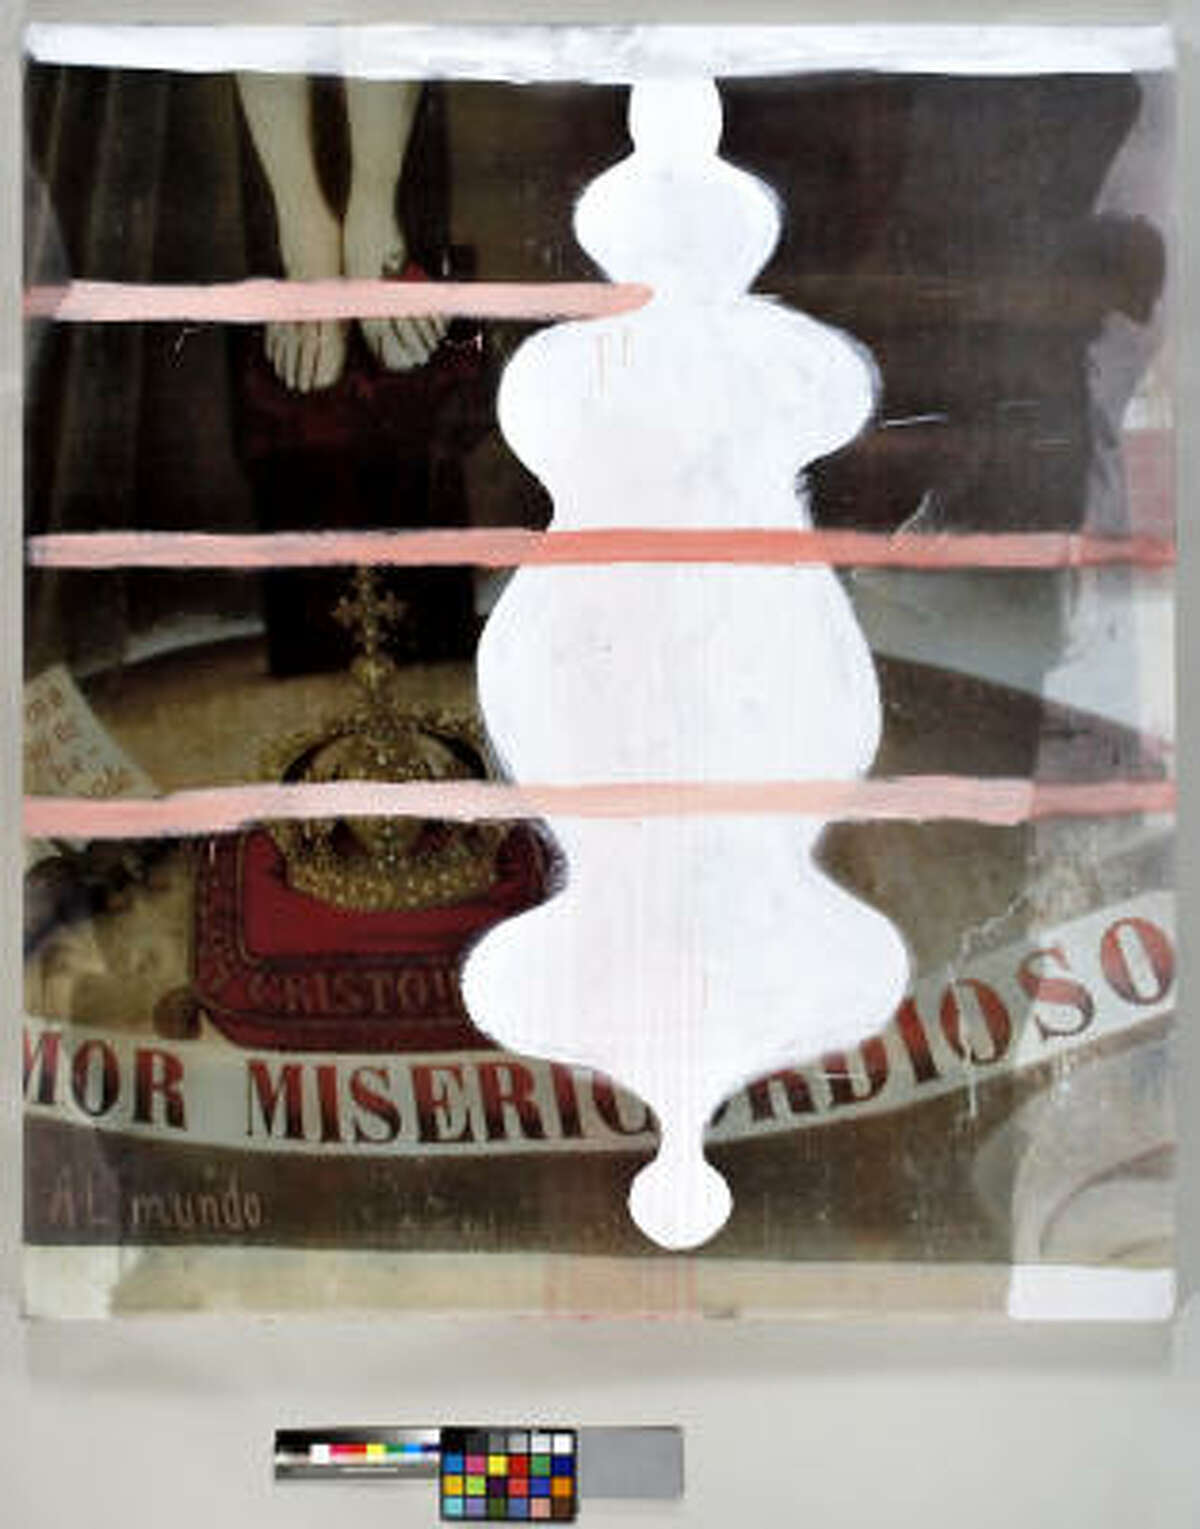 A painting by Schnabel: Untitled (Amor Misericordioso VII), 2005.